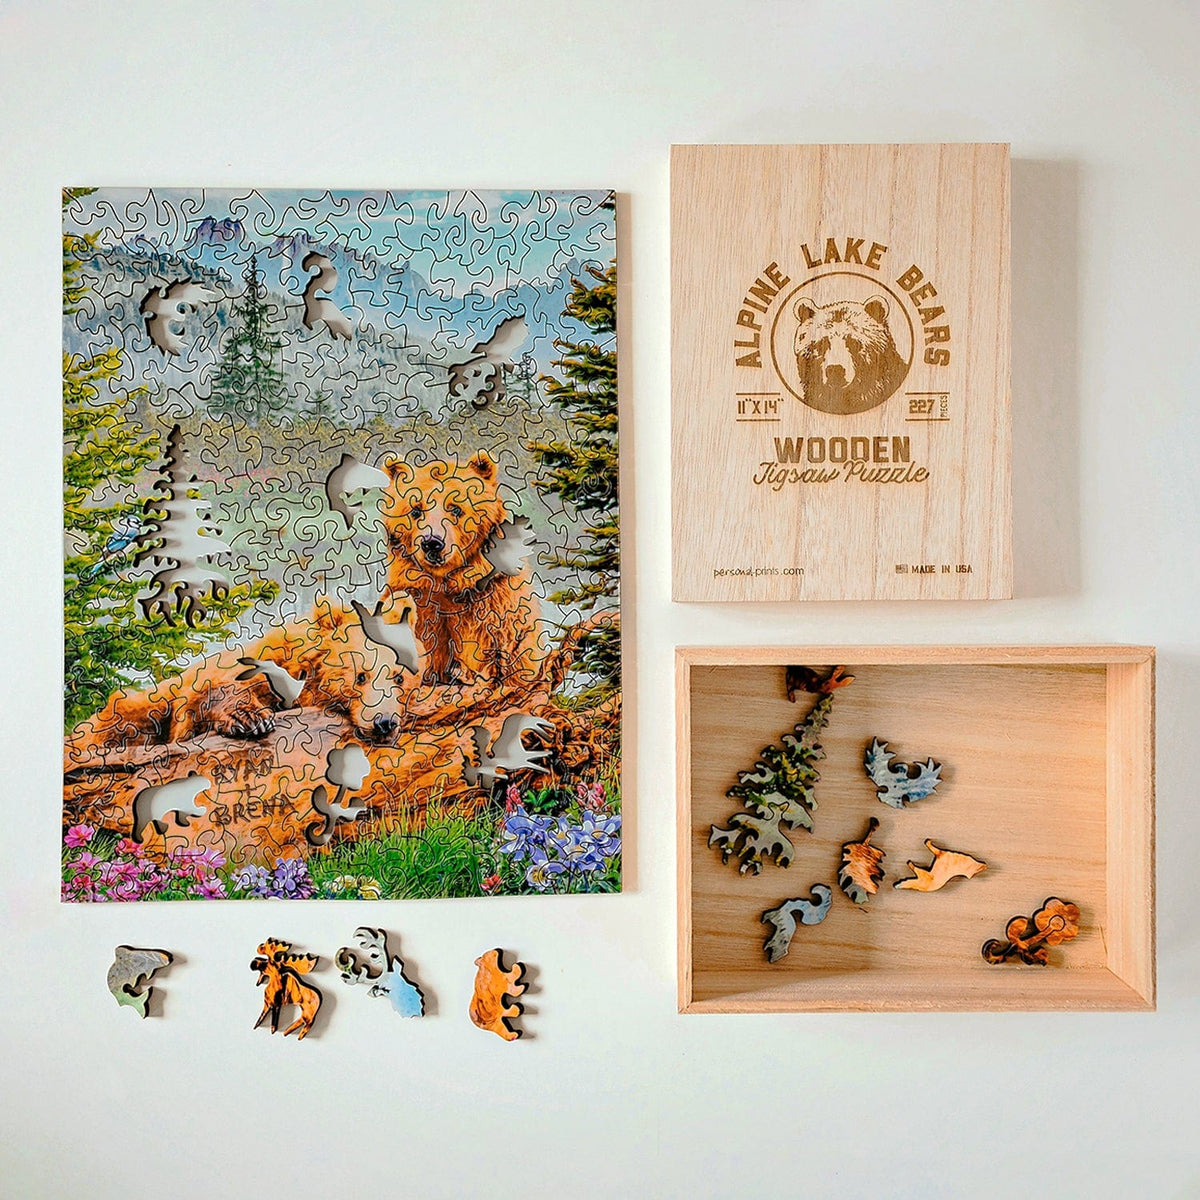 ships in a wood gift box